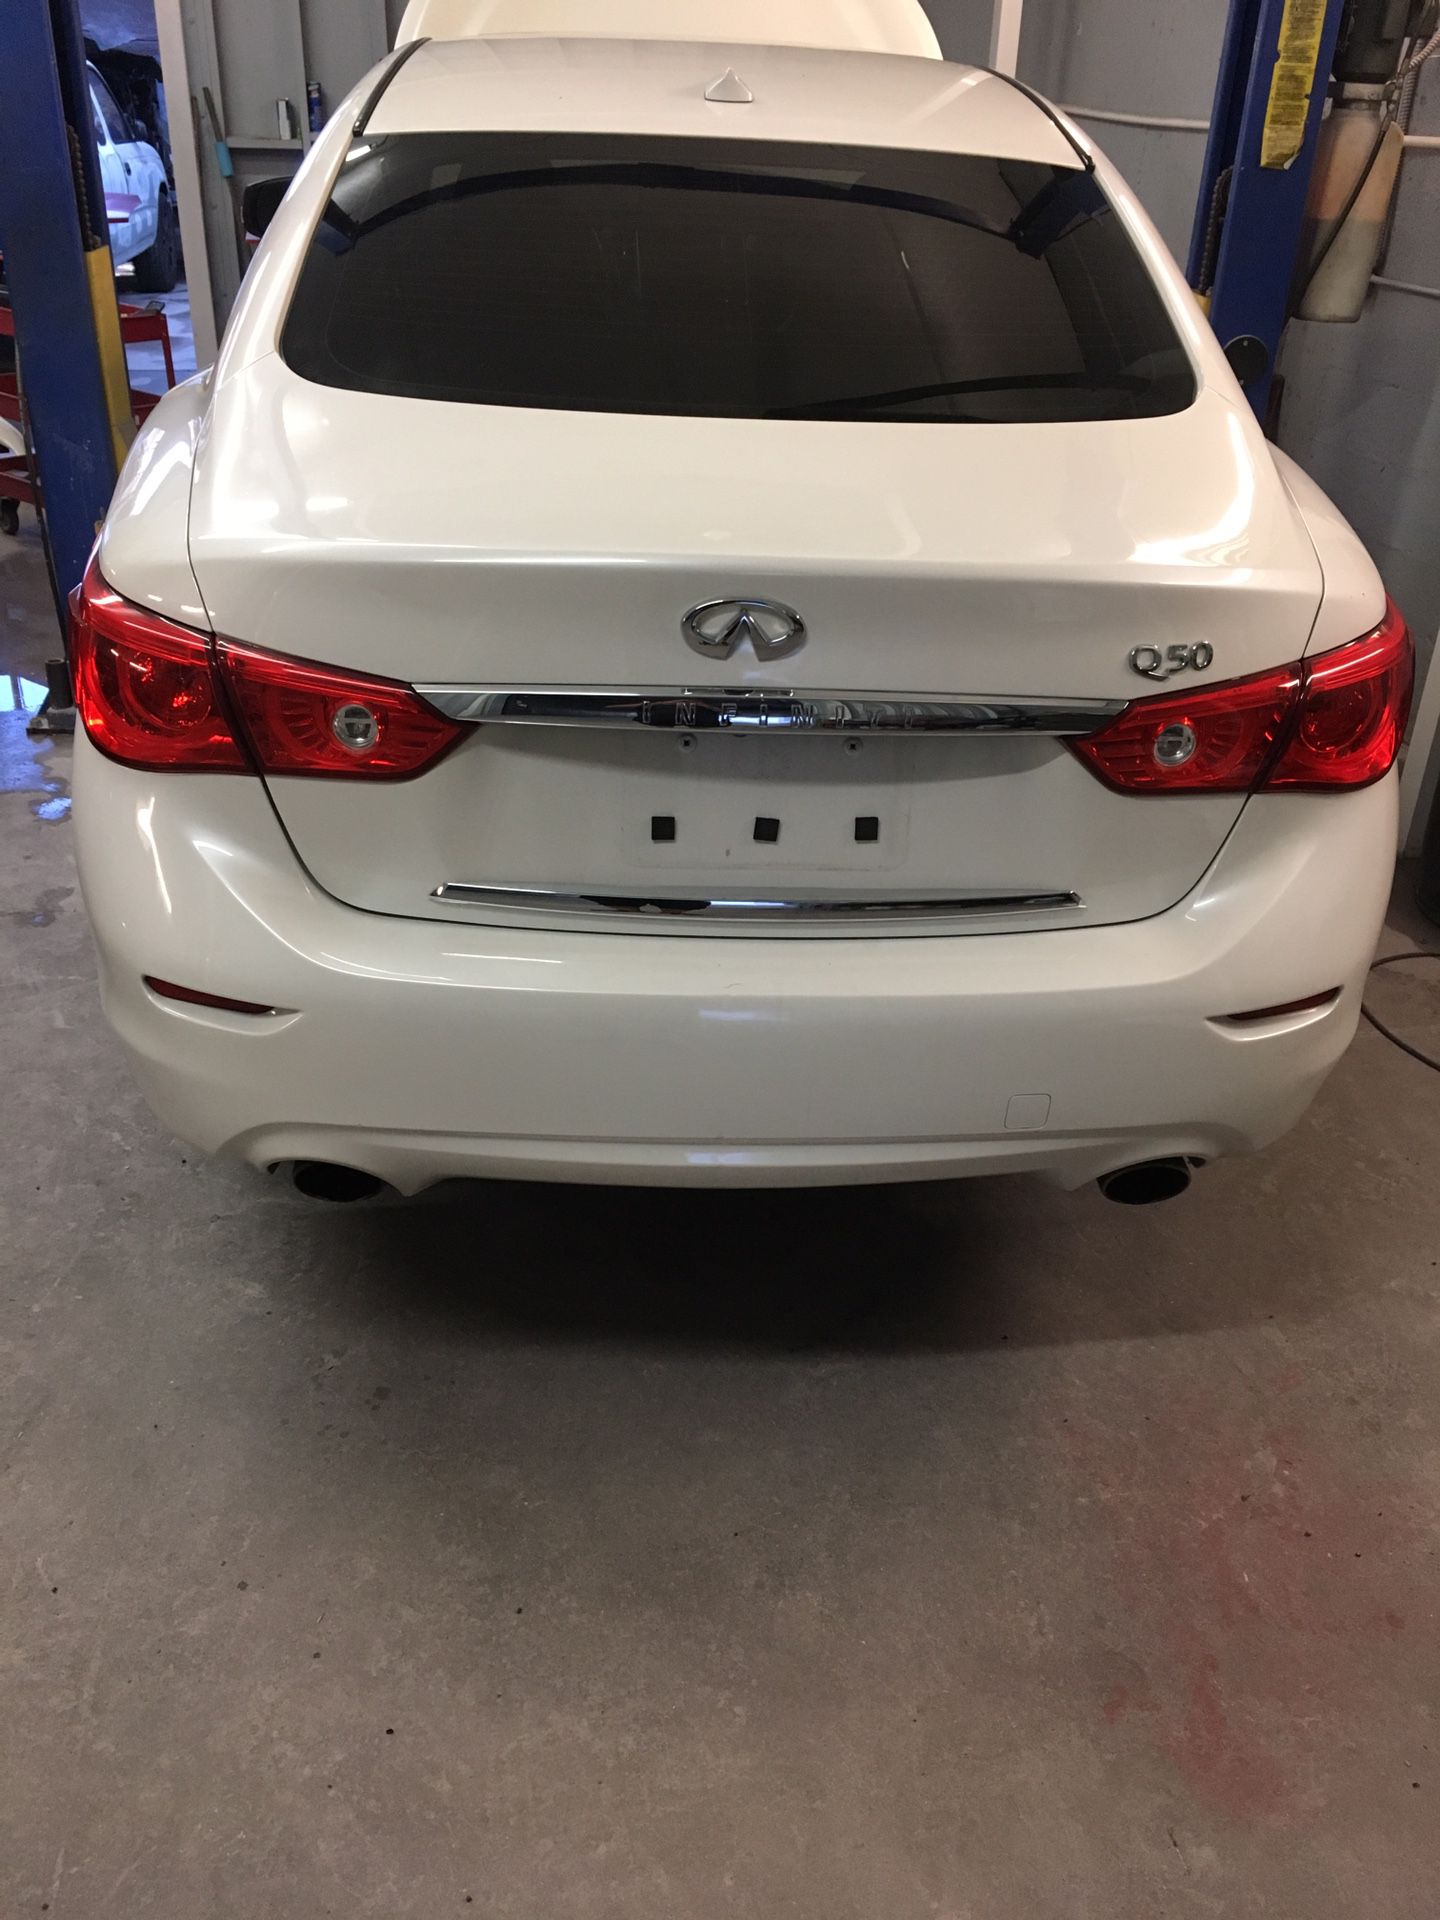 Infinity Q50 parts only year 2015 CD title